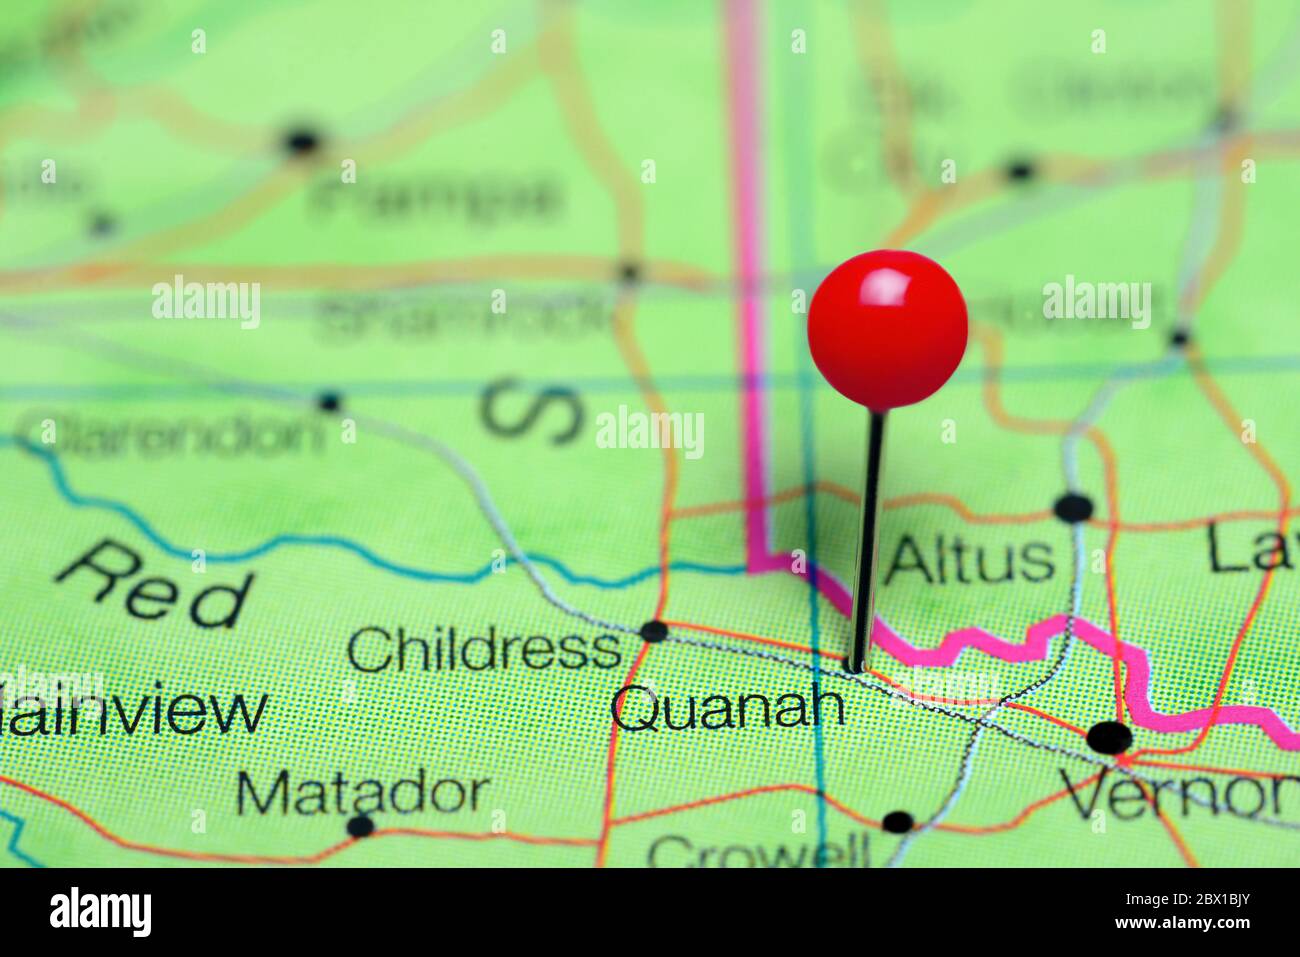 Quanah pinned on a map of Texas, USA Stock Photo